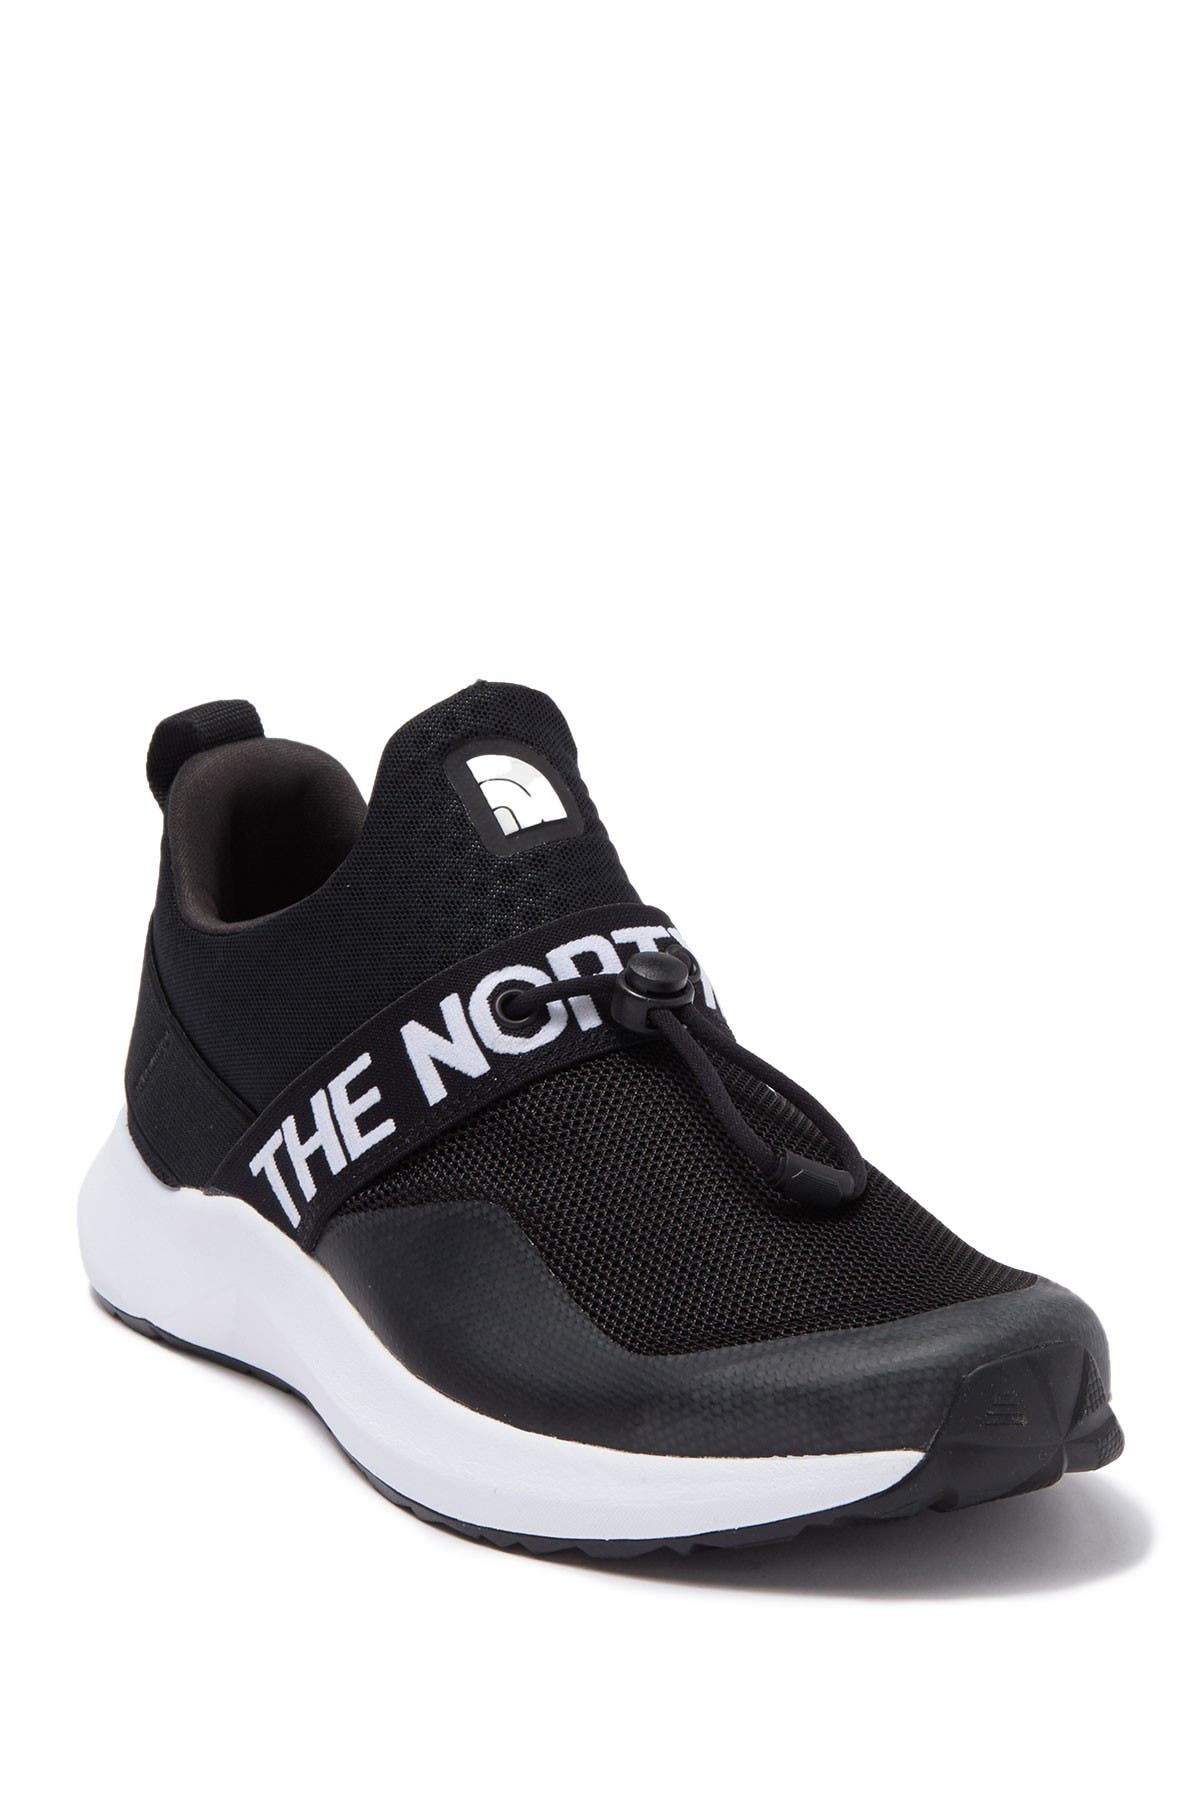 north face sneaker